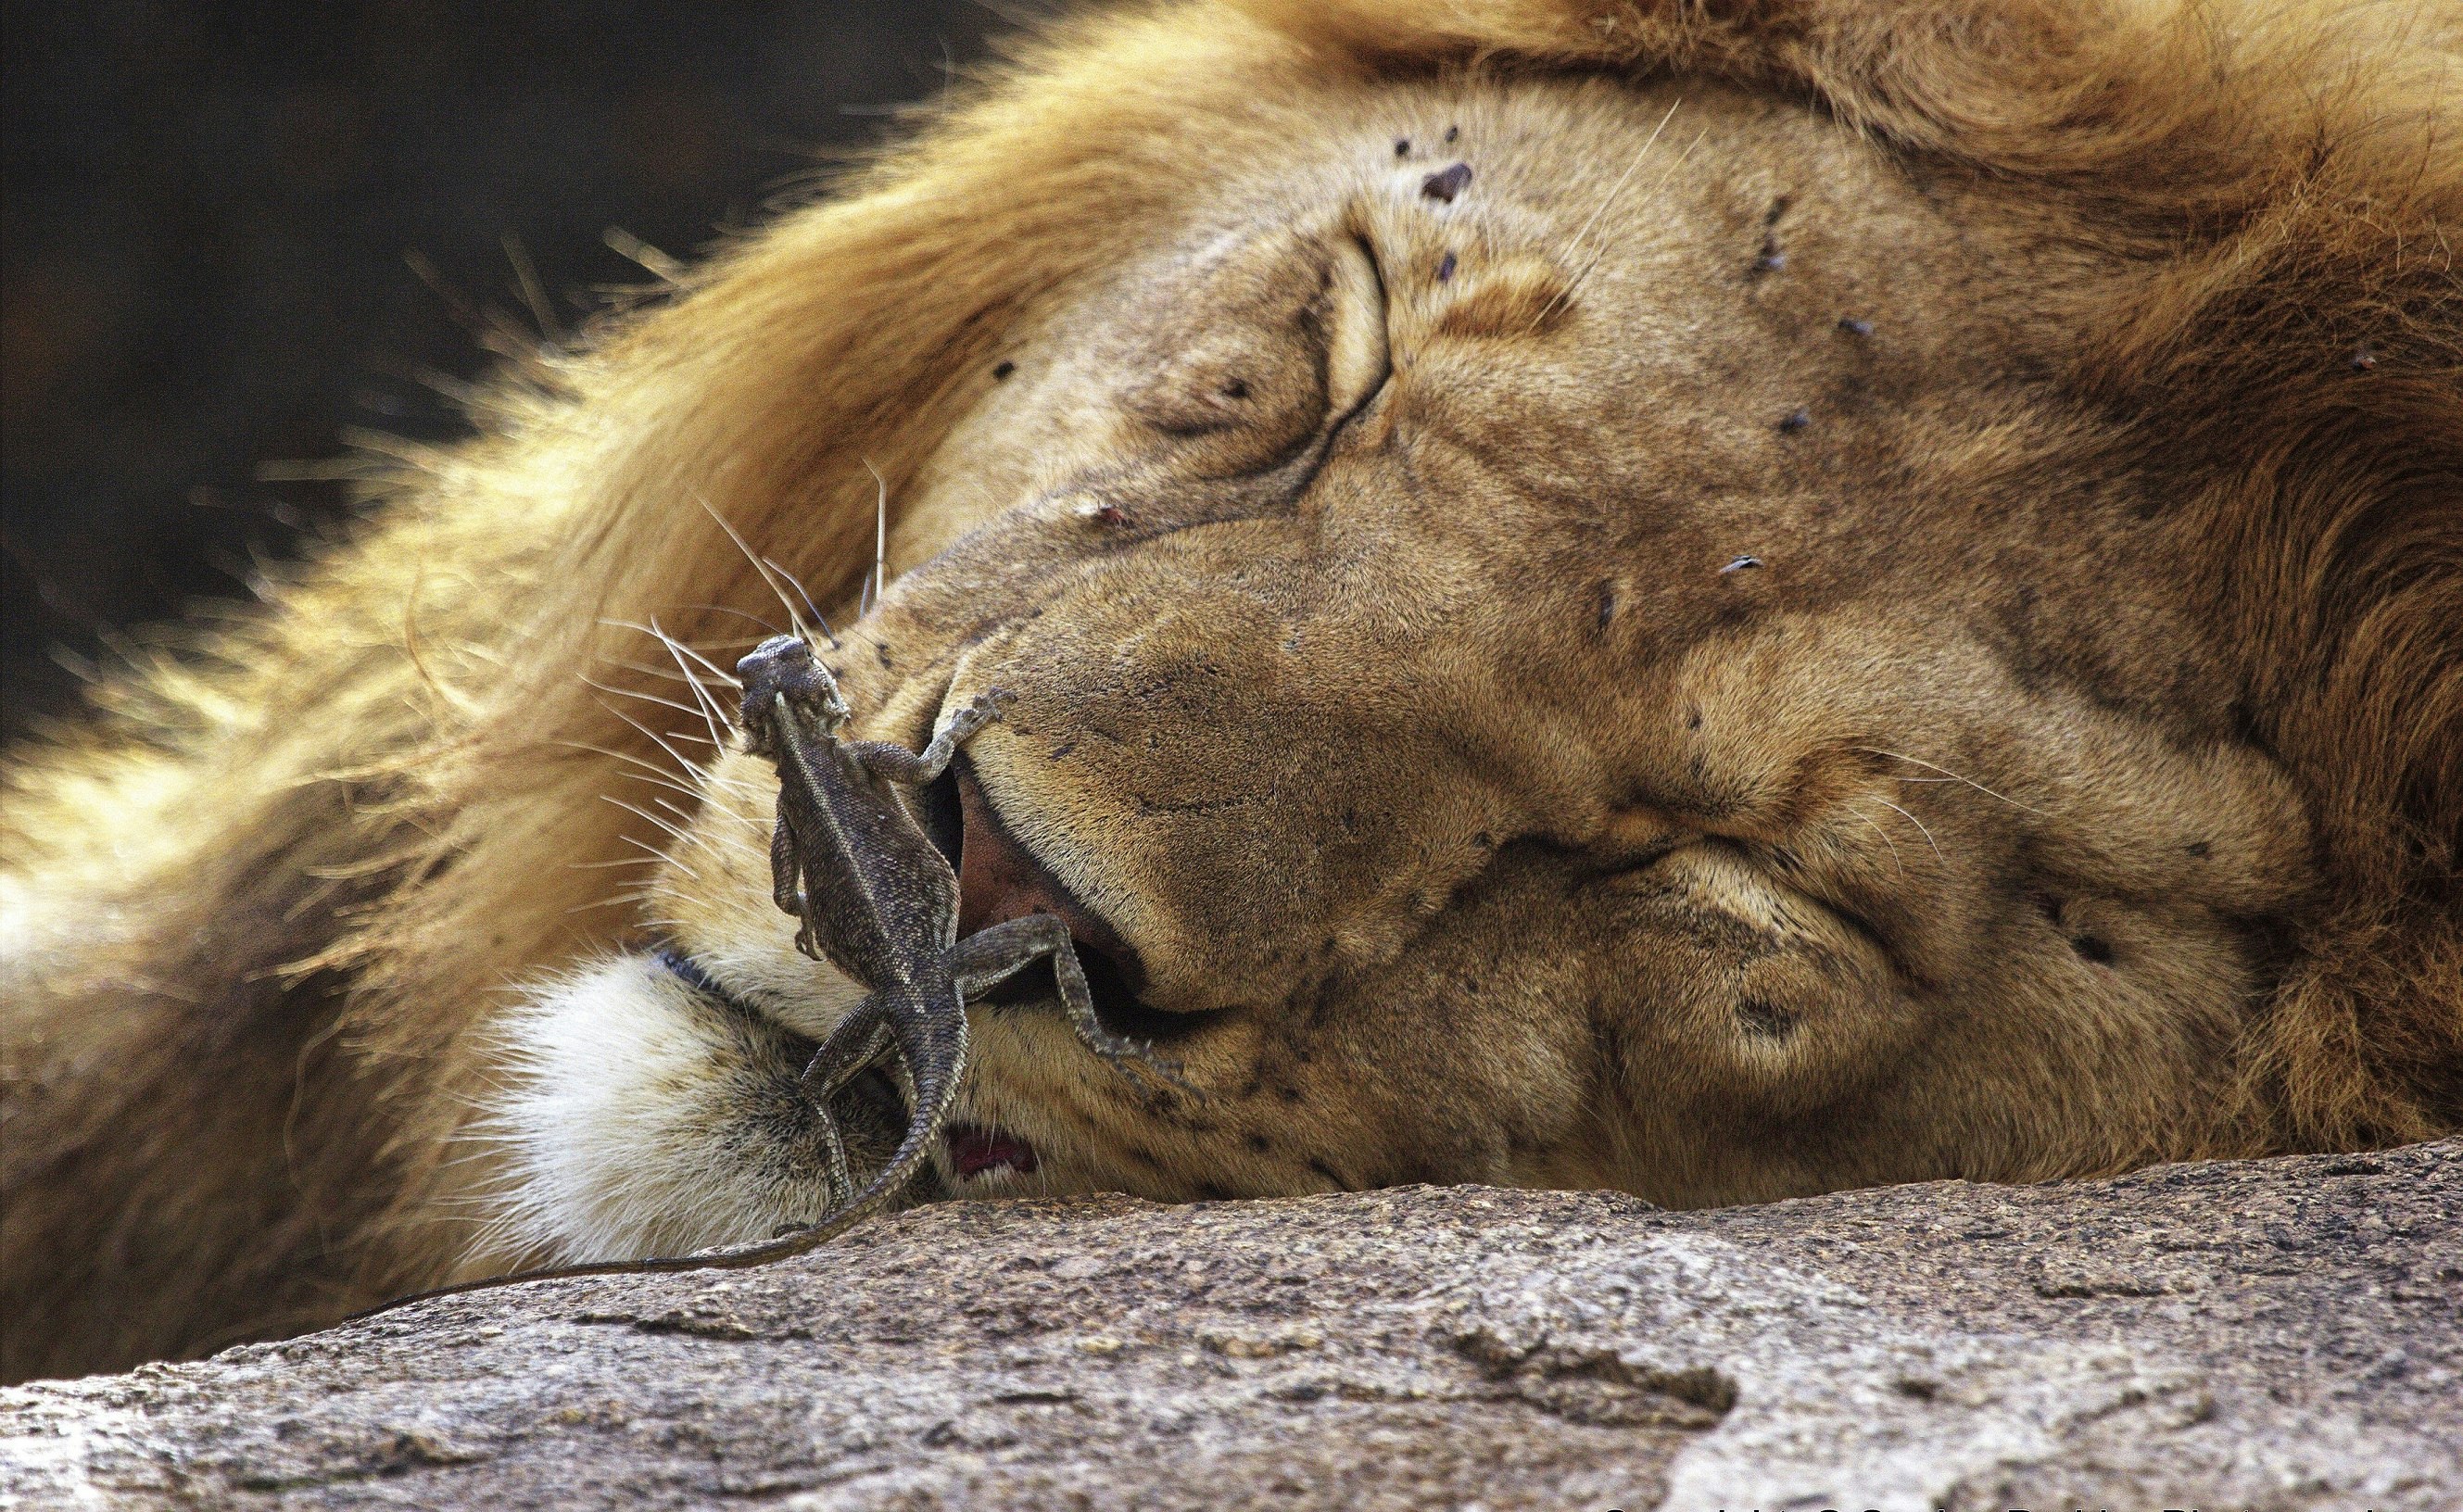 All that is visible is the head of a huge male lion that is asleep; climbing on the lion's nose is a lizard.